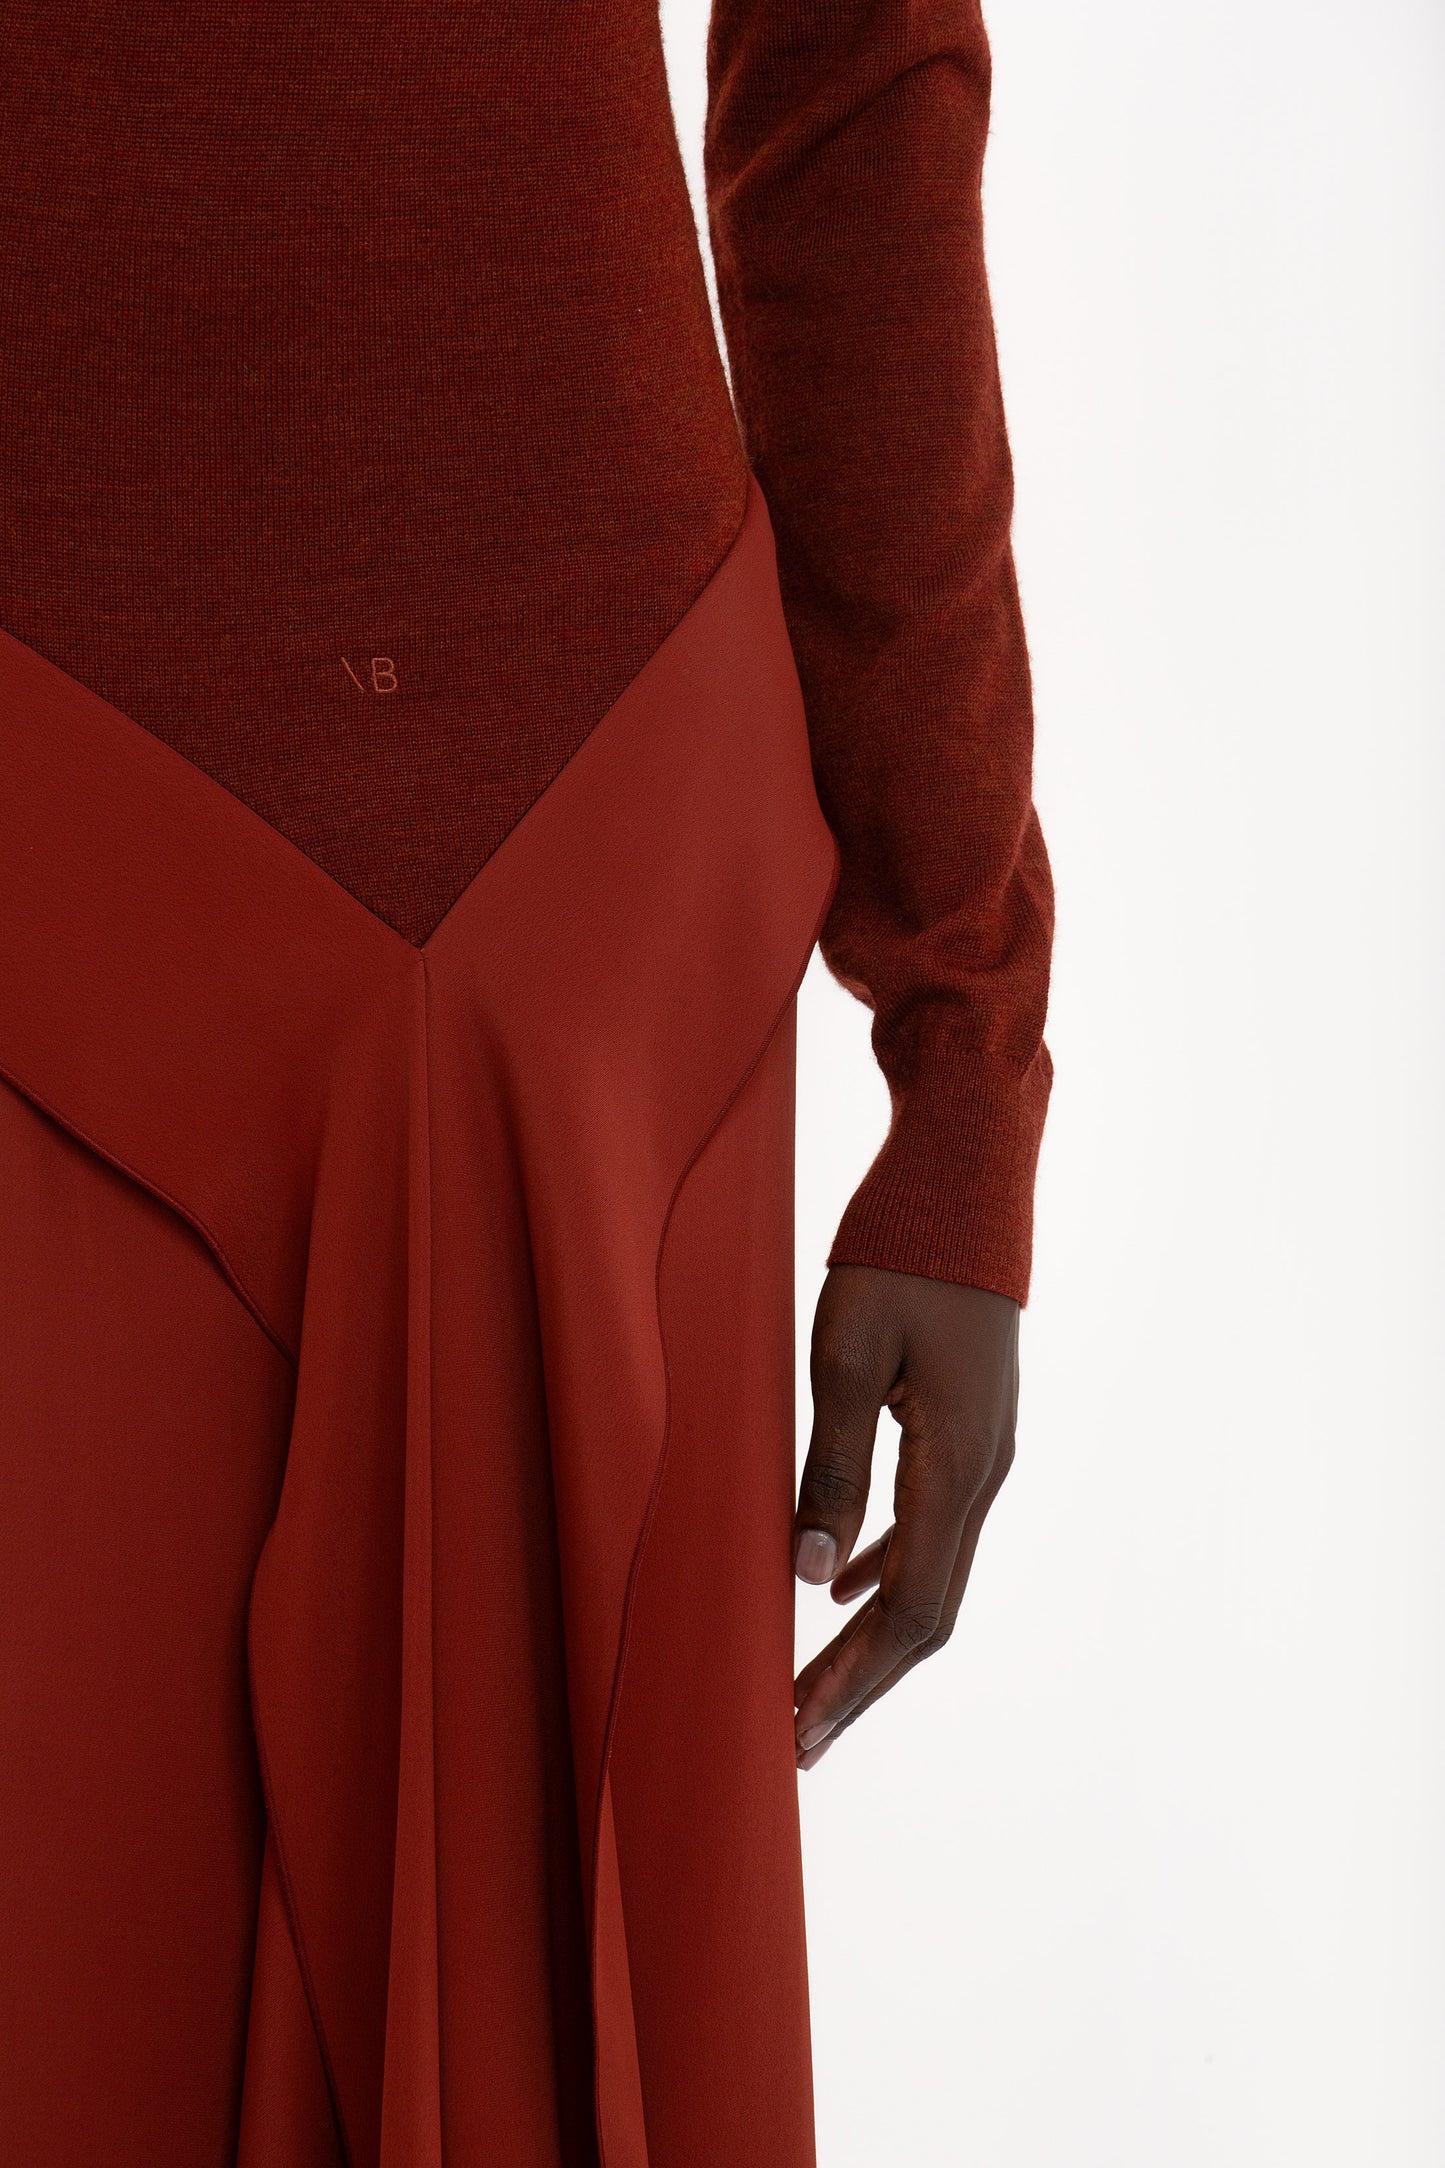 A close-up of a person wearing the High Neck Tie Detail Dress In Russet by Victoria Beckham. The person’s right arm is visible, and the fabric features pleats and an asymmetric hemline.